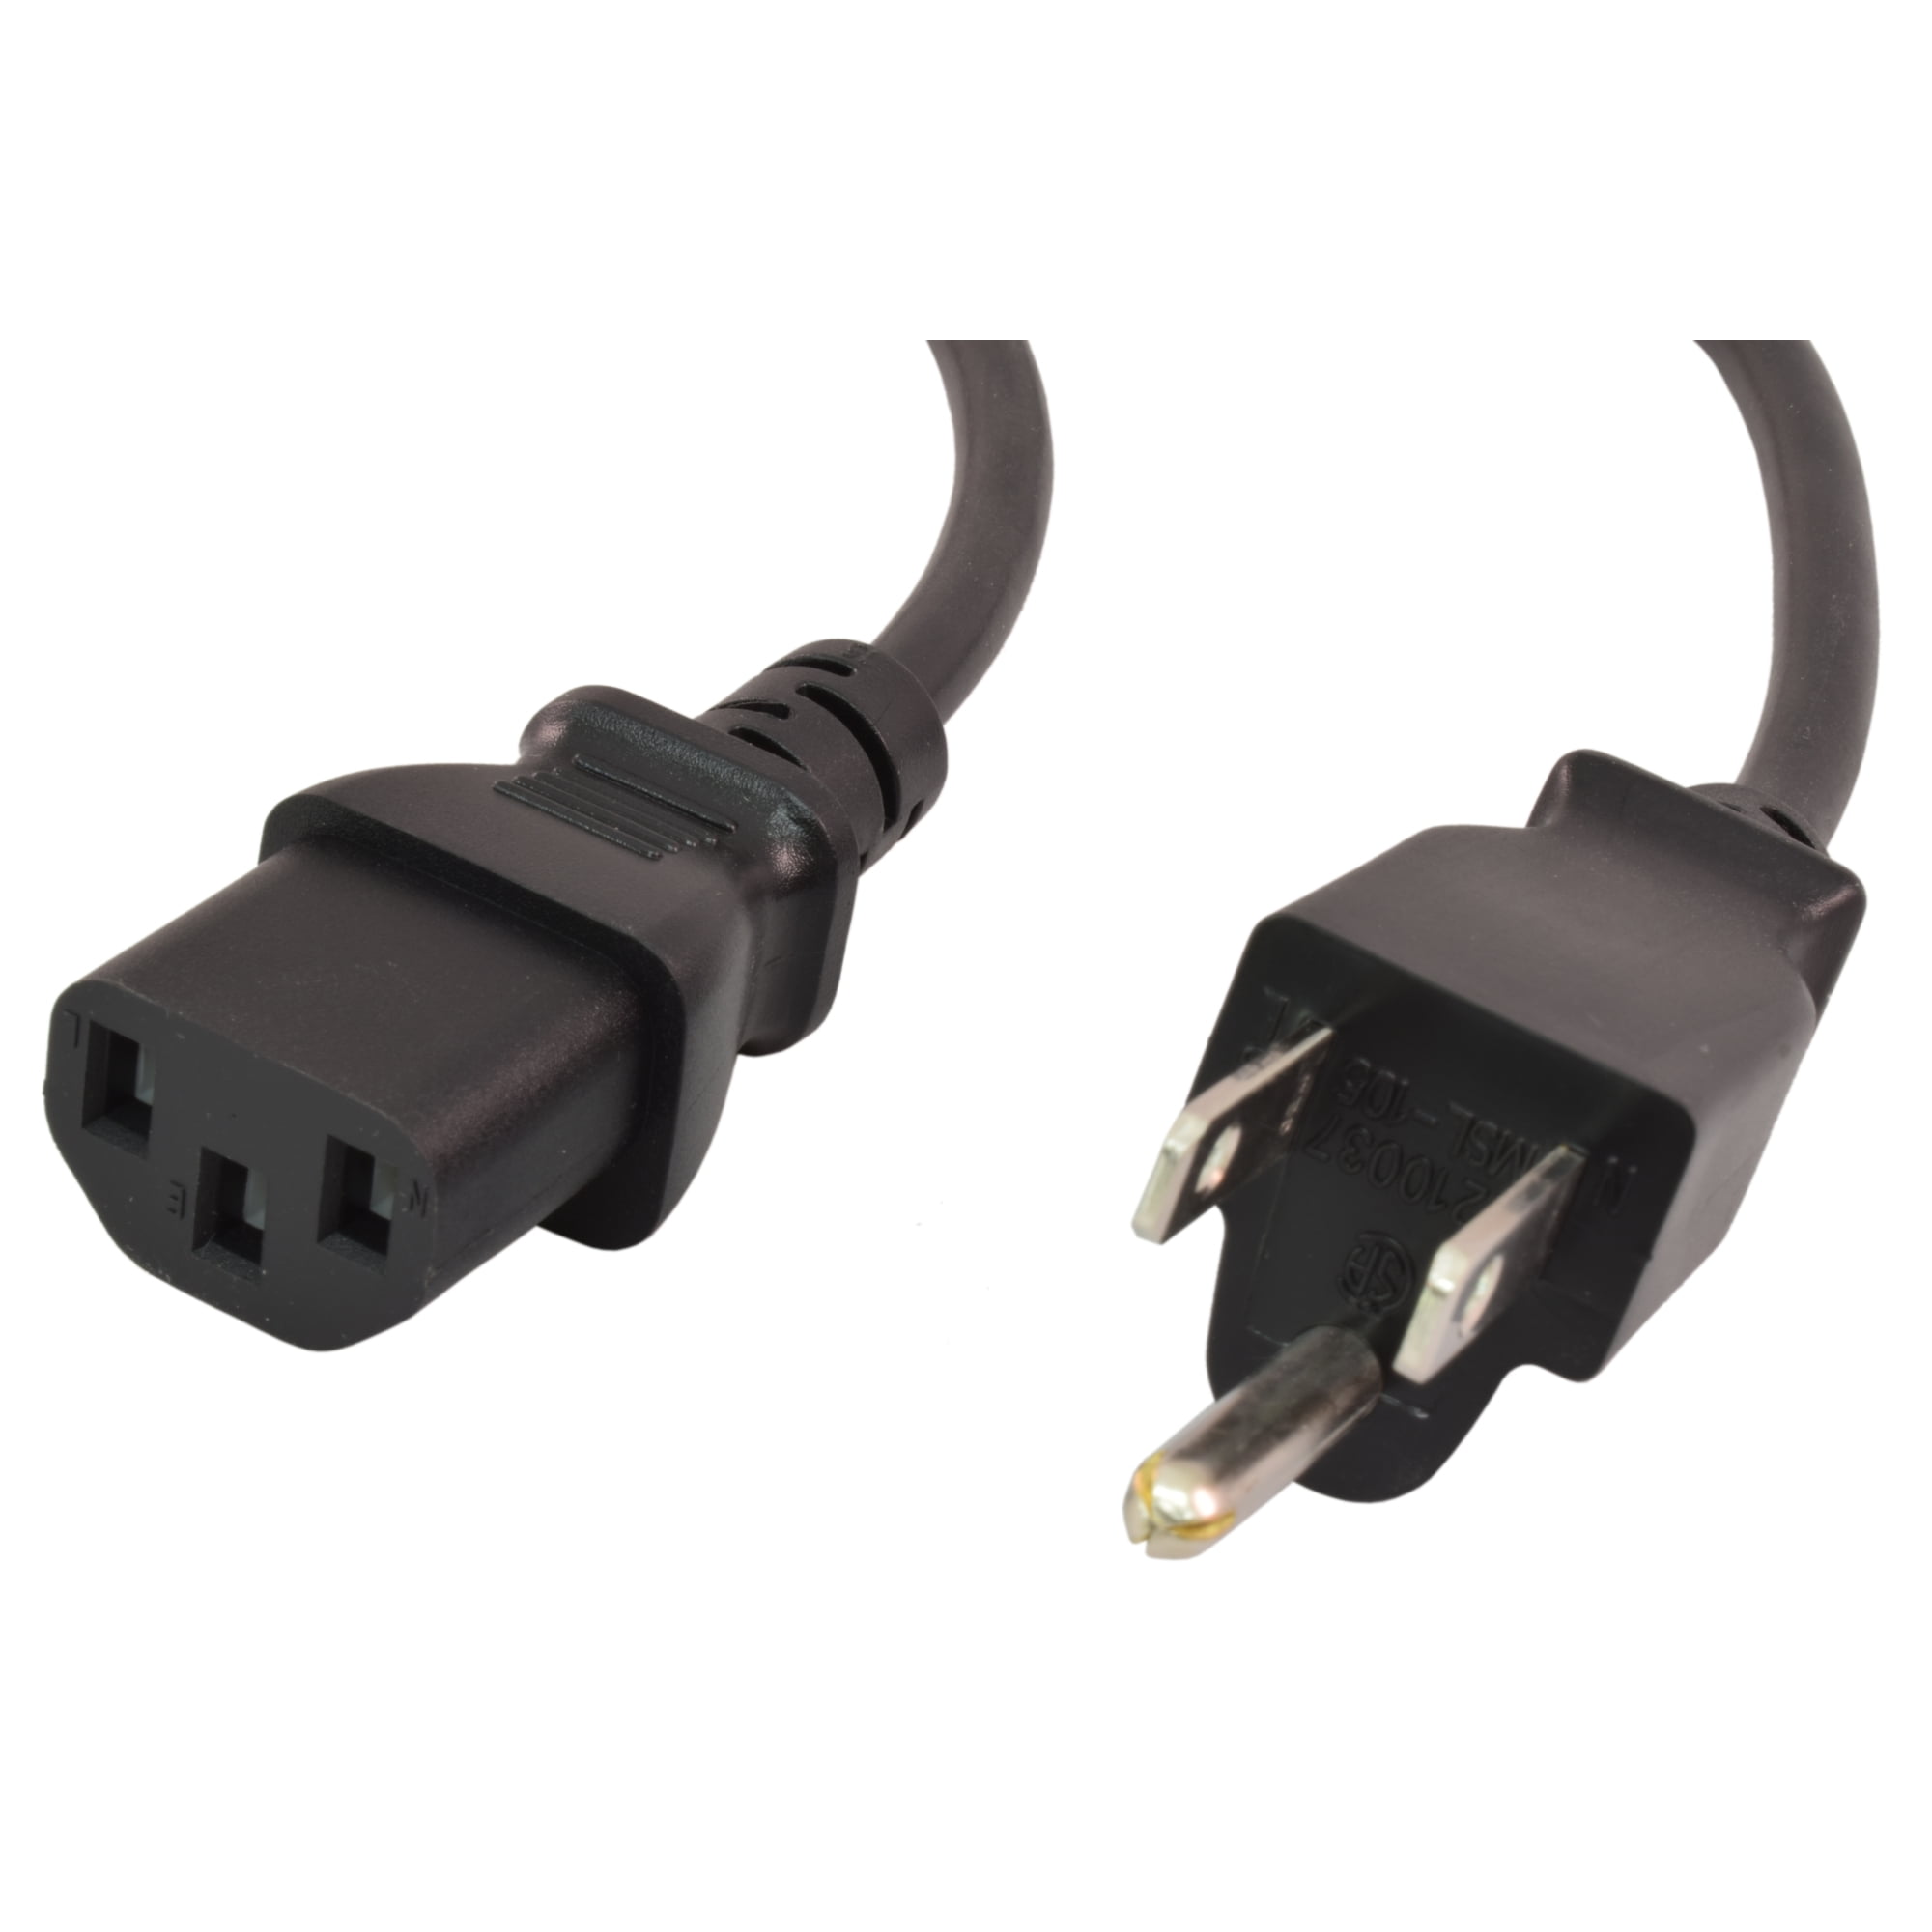 Approximately 6' Long 3 Prong Power Cord AC Power Adapter 